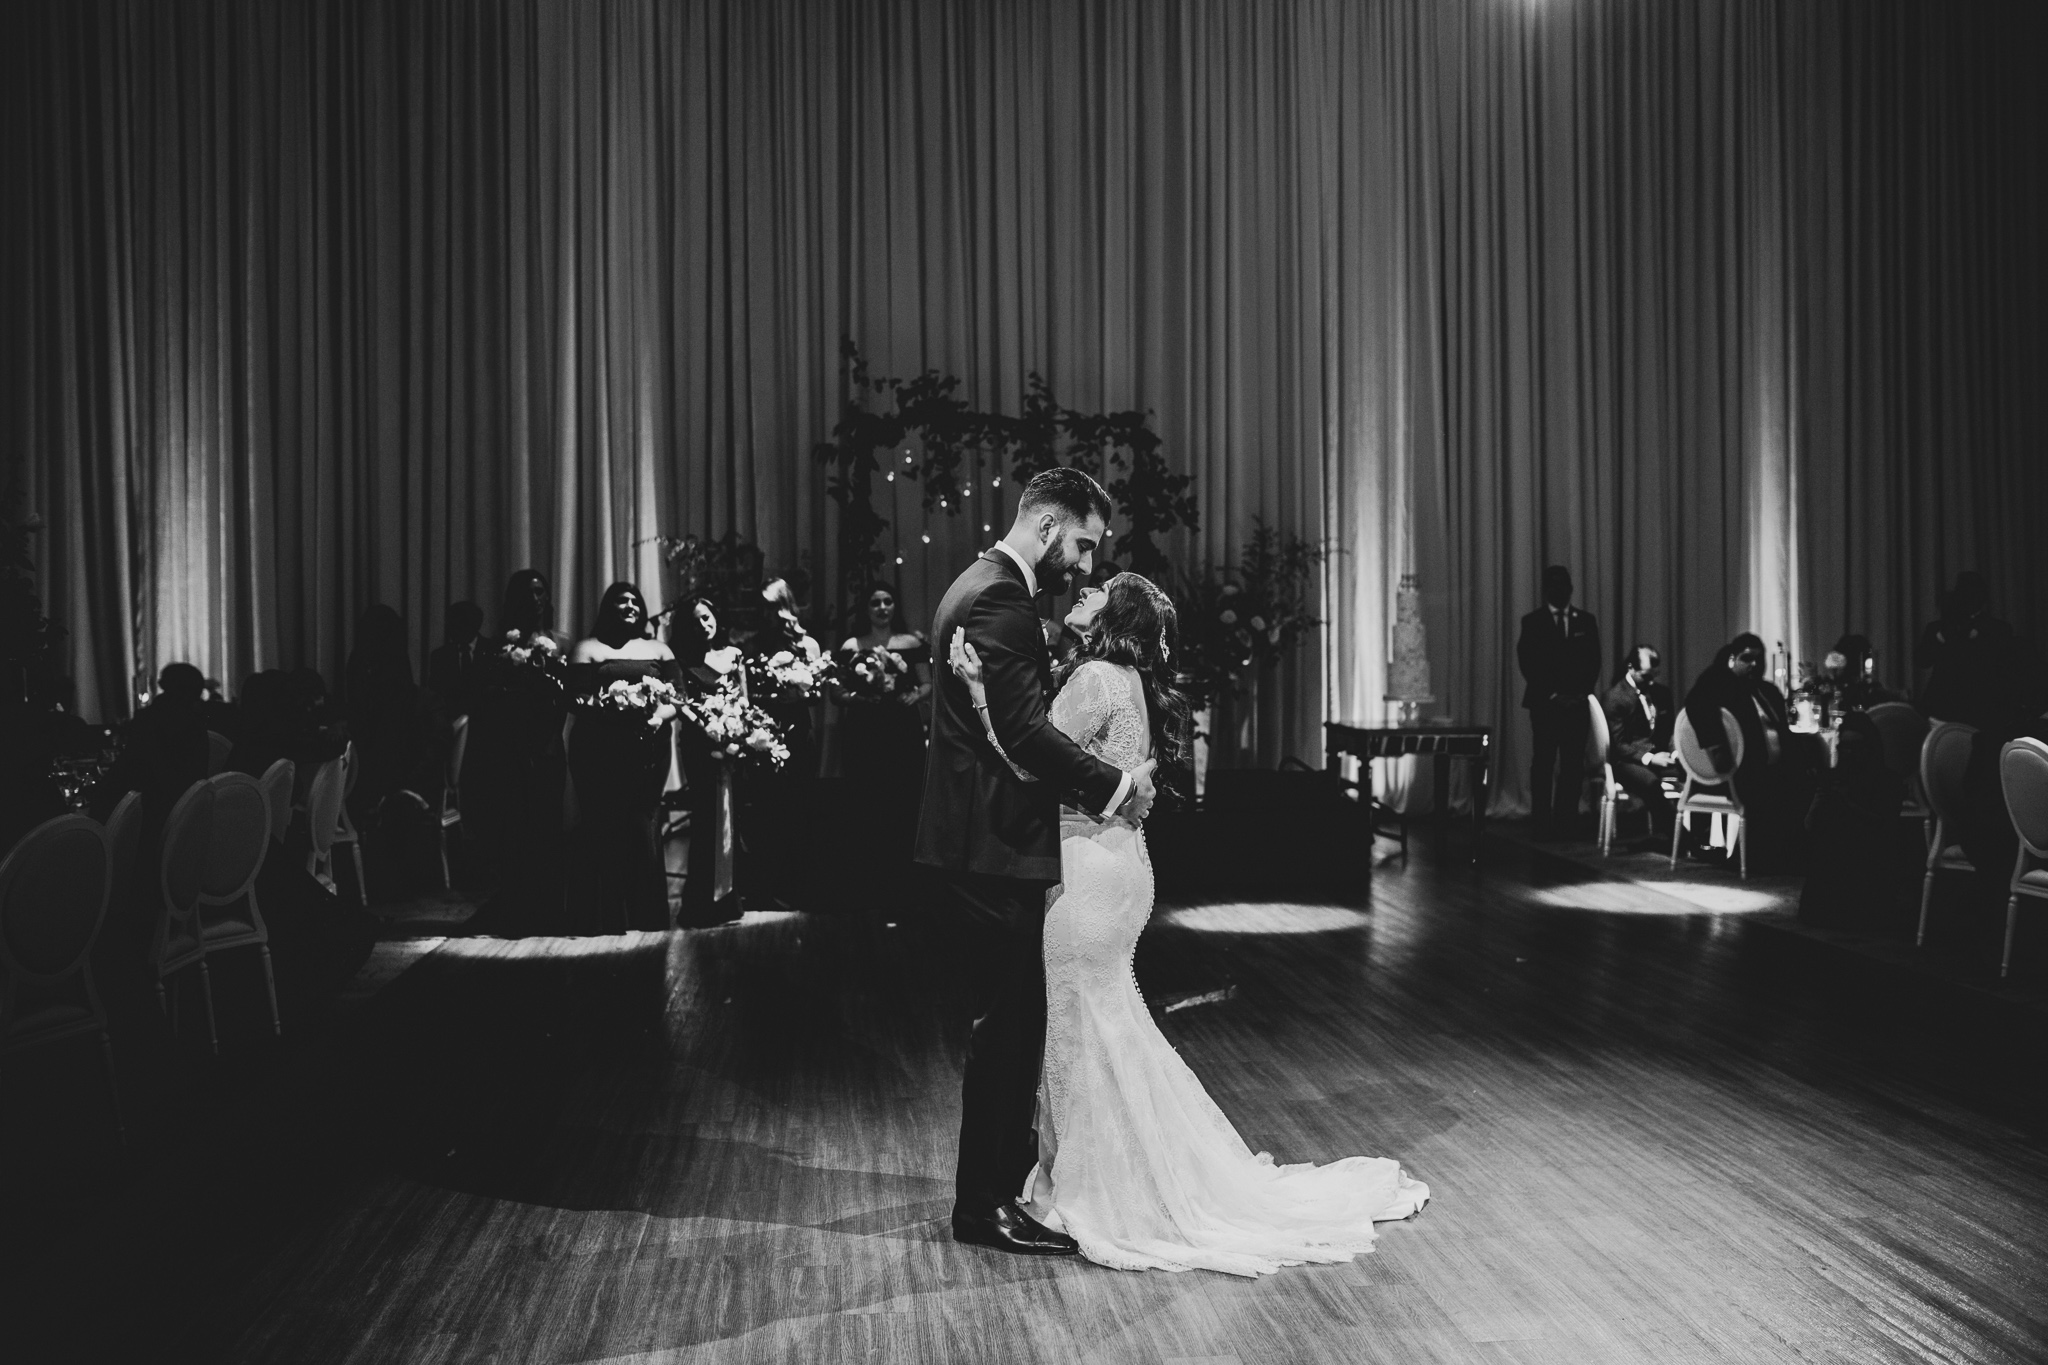 First dance in the ballroom of Chateau le Parc